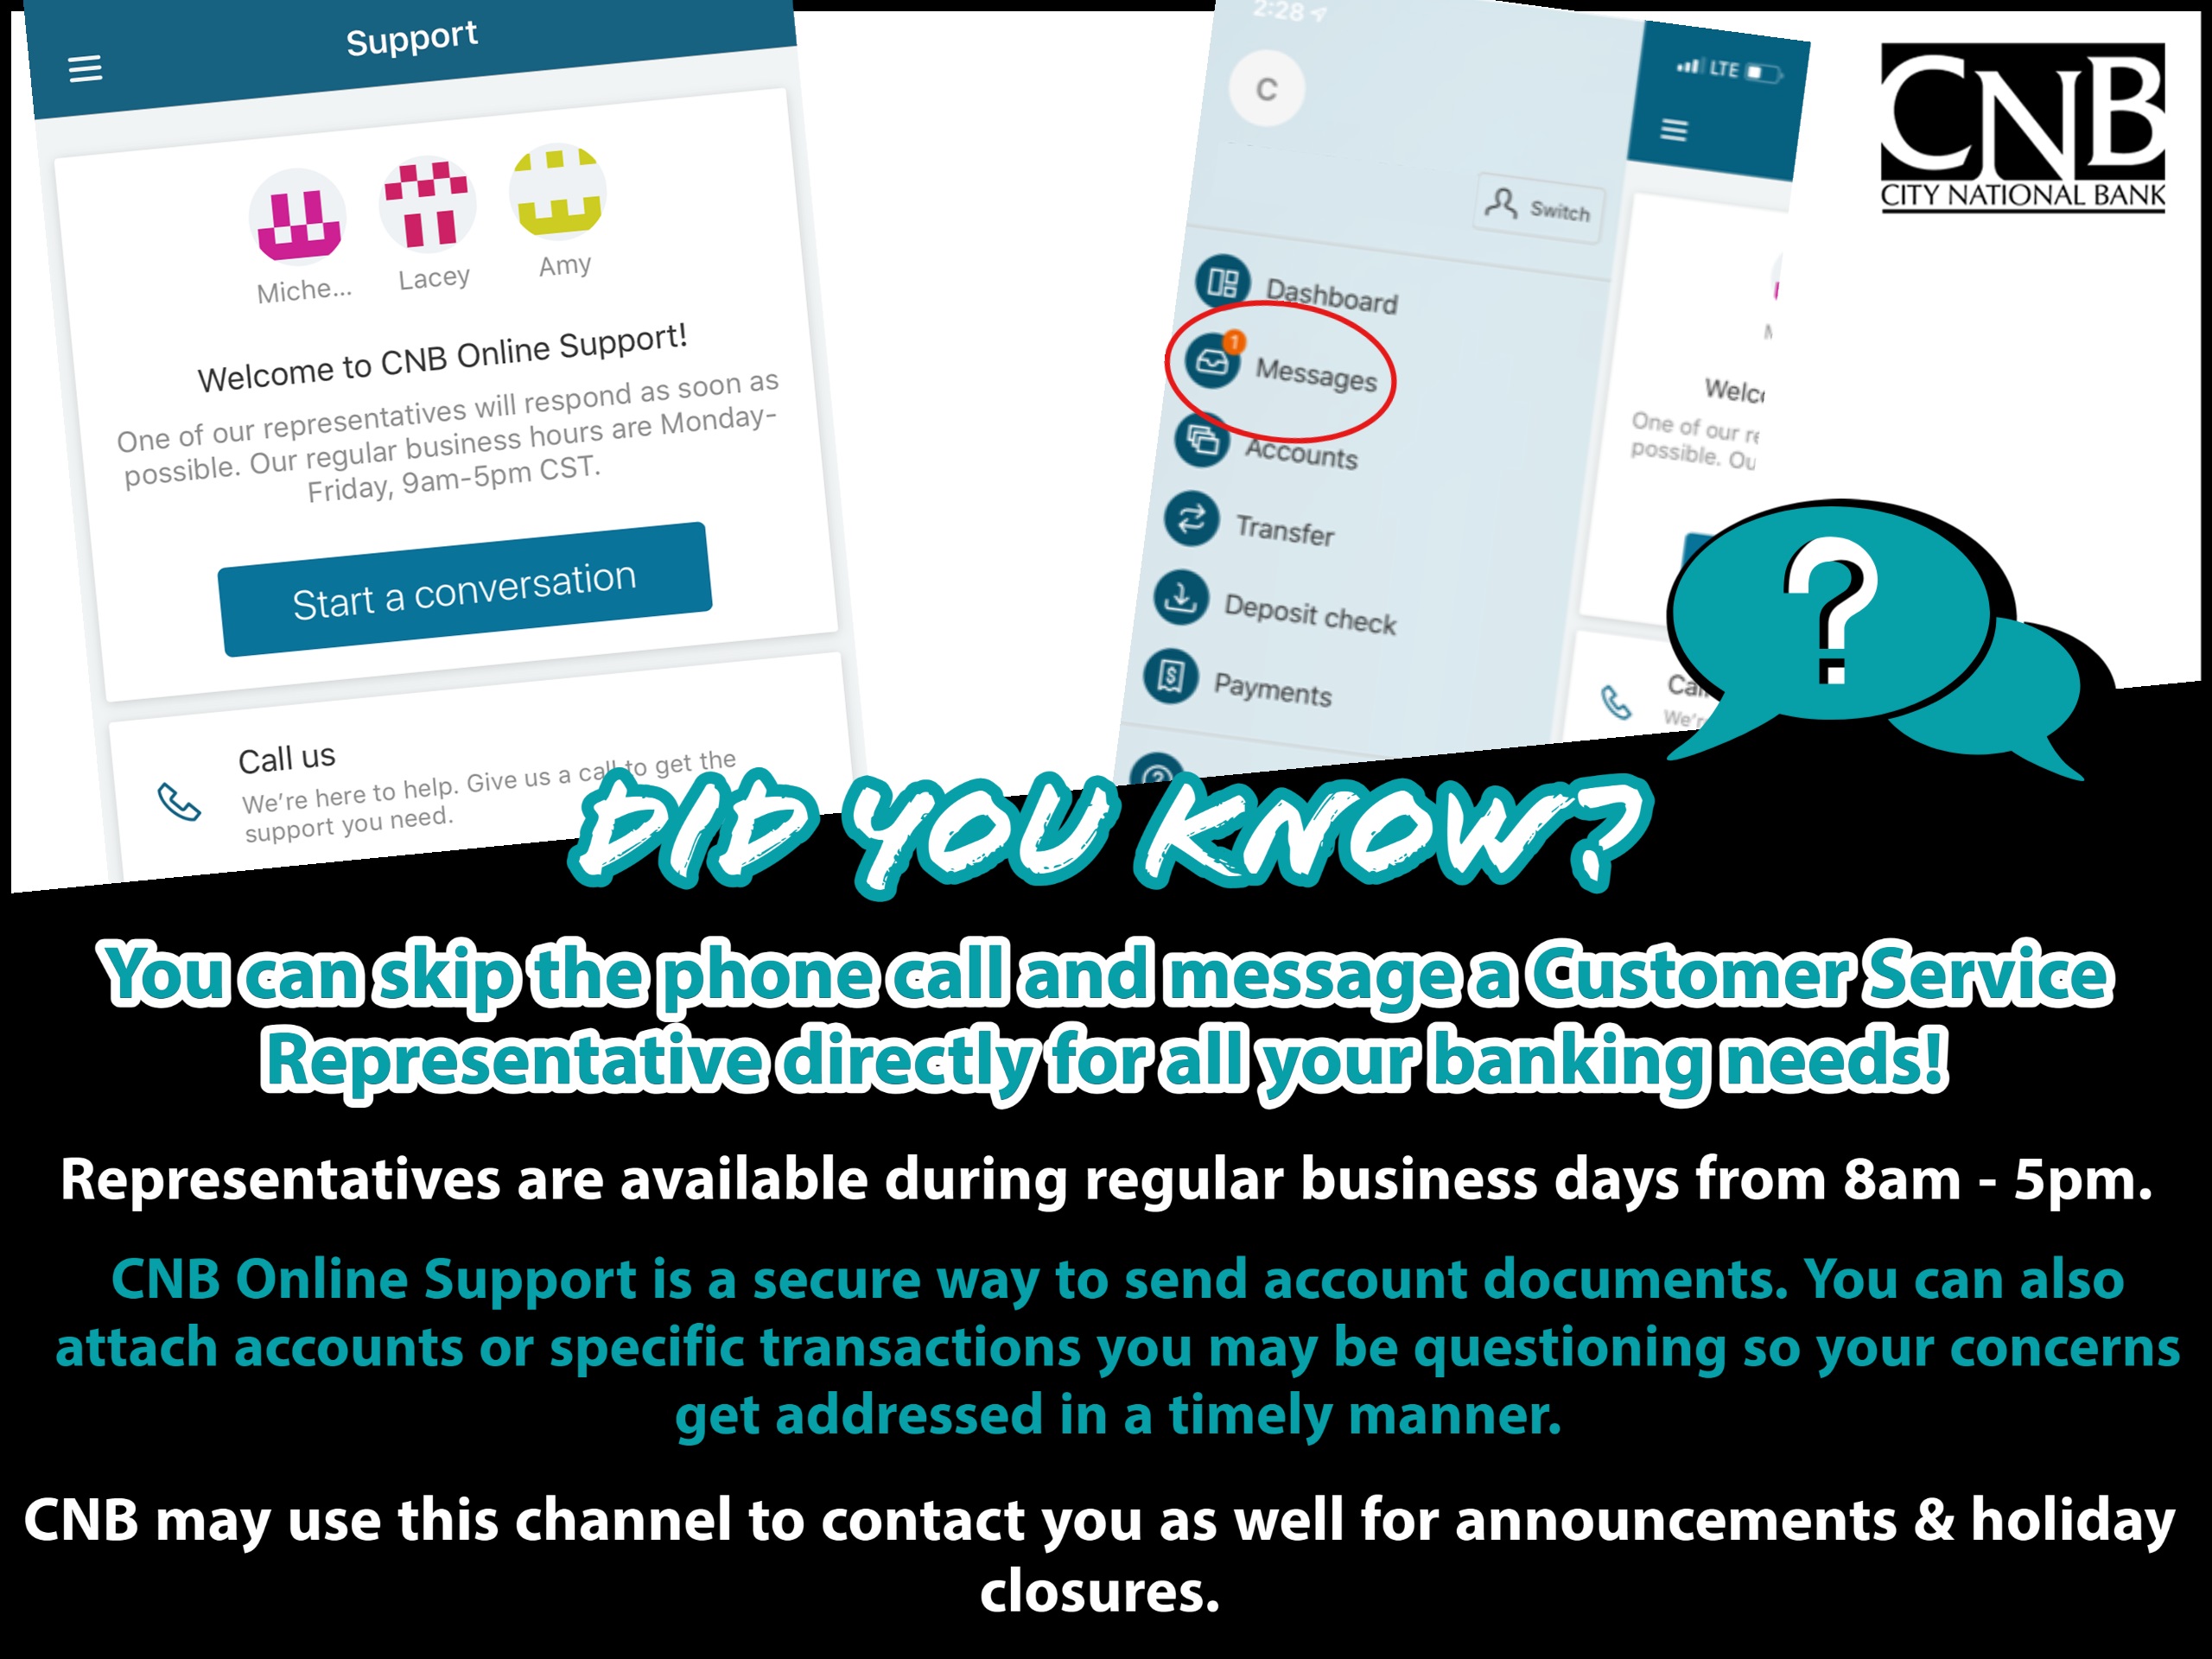 "did you know" graphic explaining CNB online support and conversations